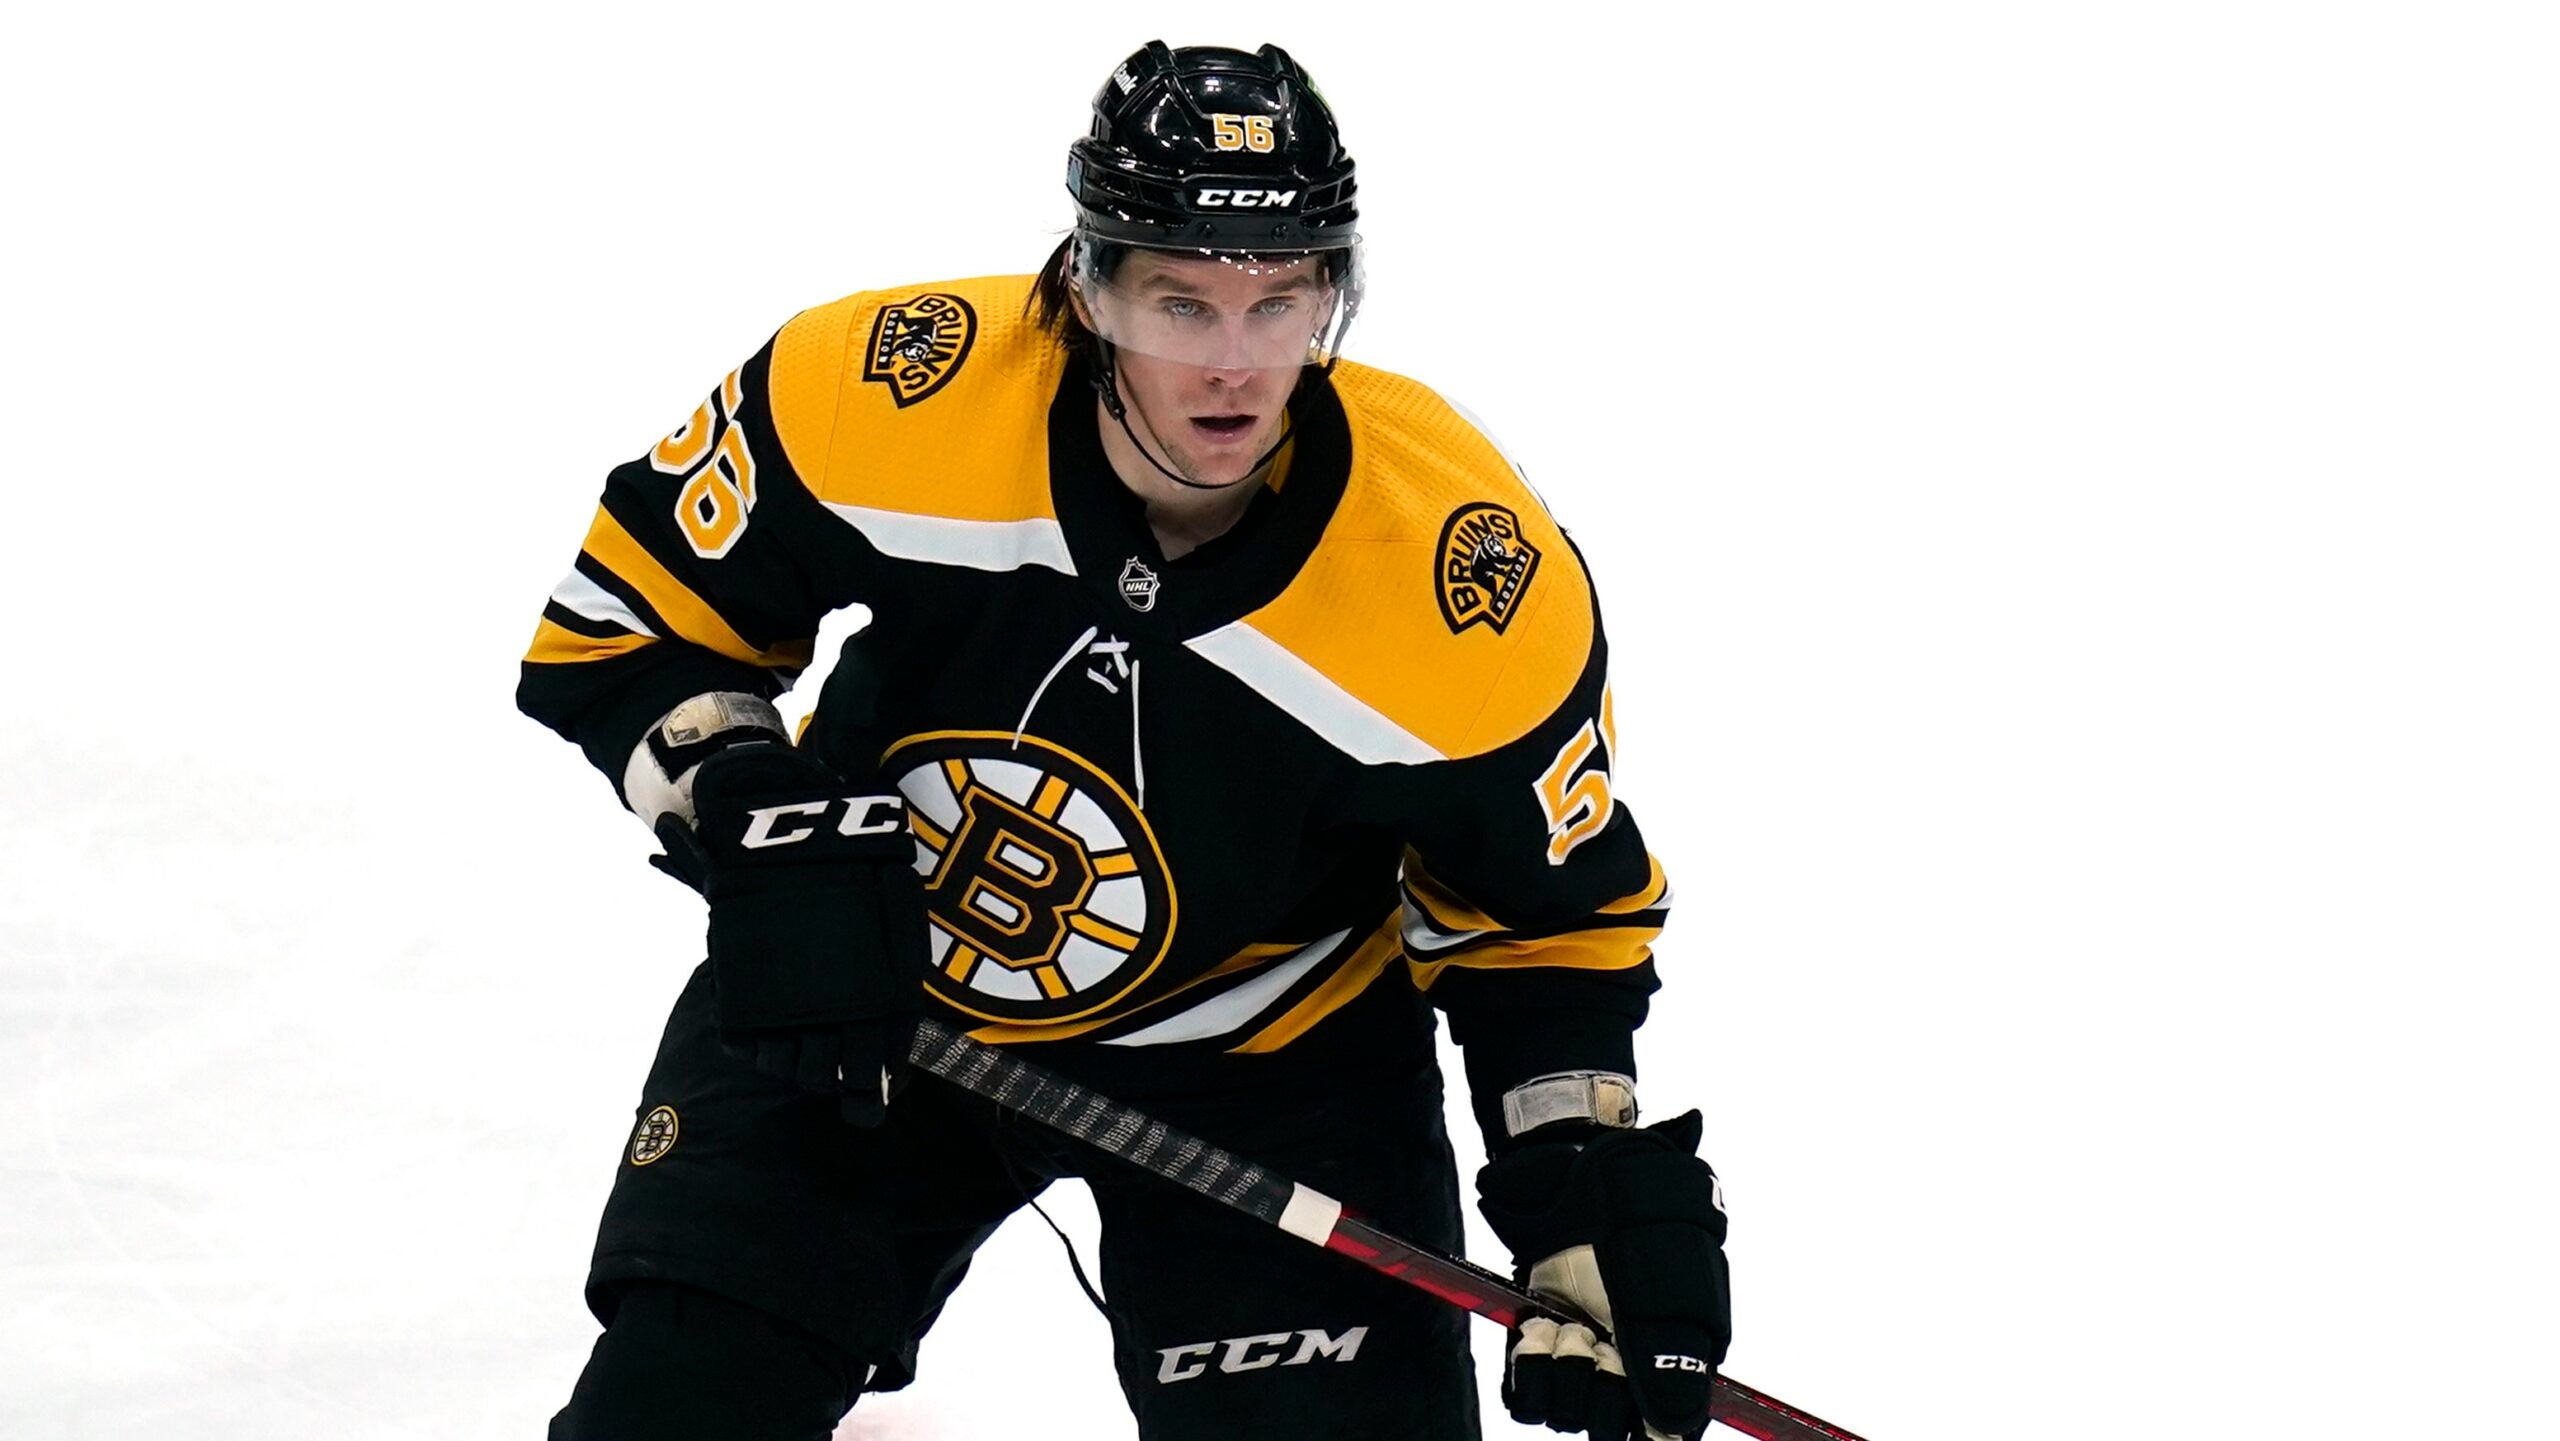 Report: Price Tag to Keep David Pastrnak a Bruin Revealed